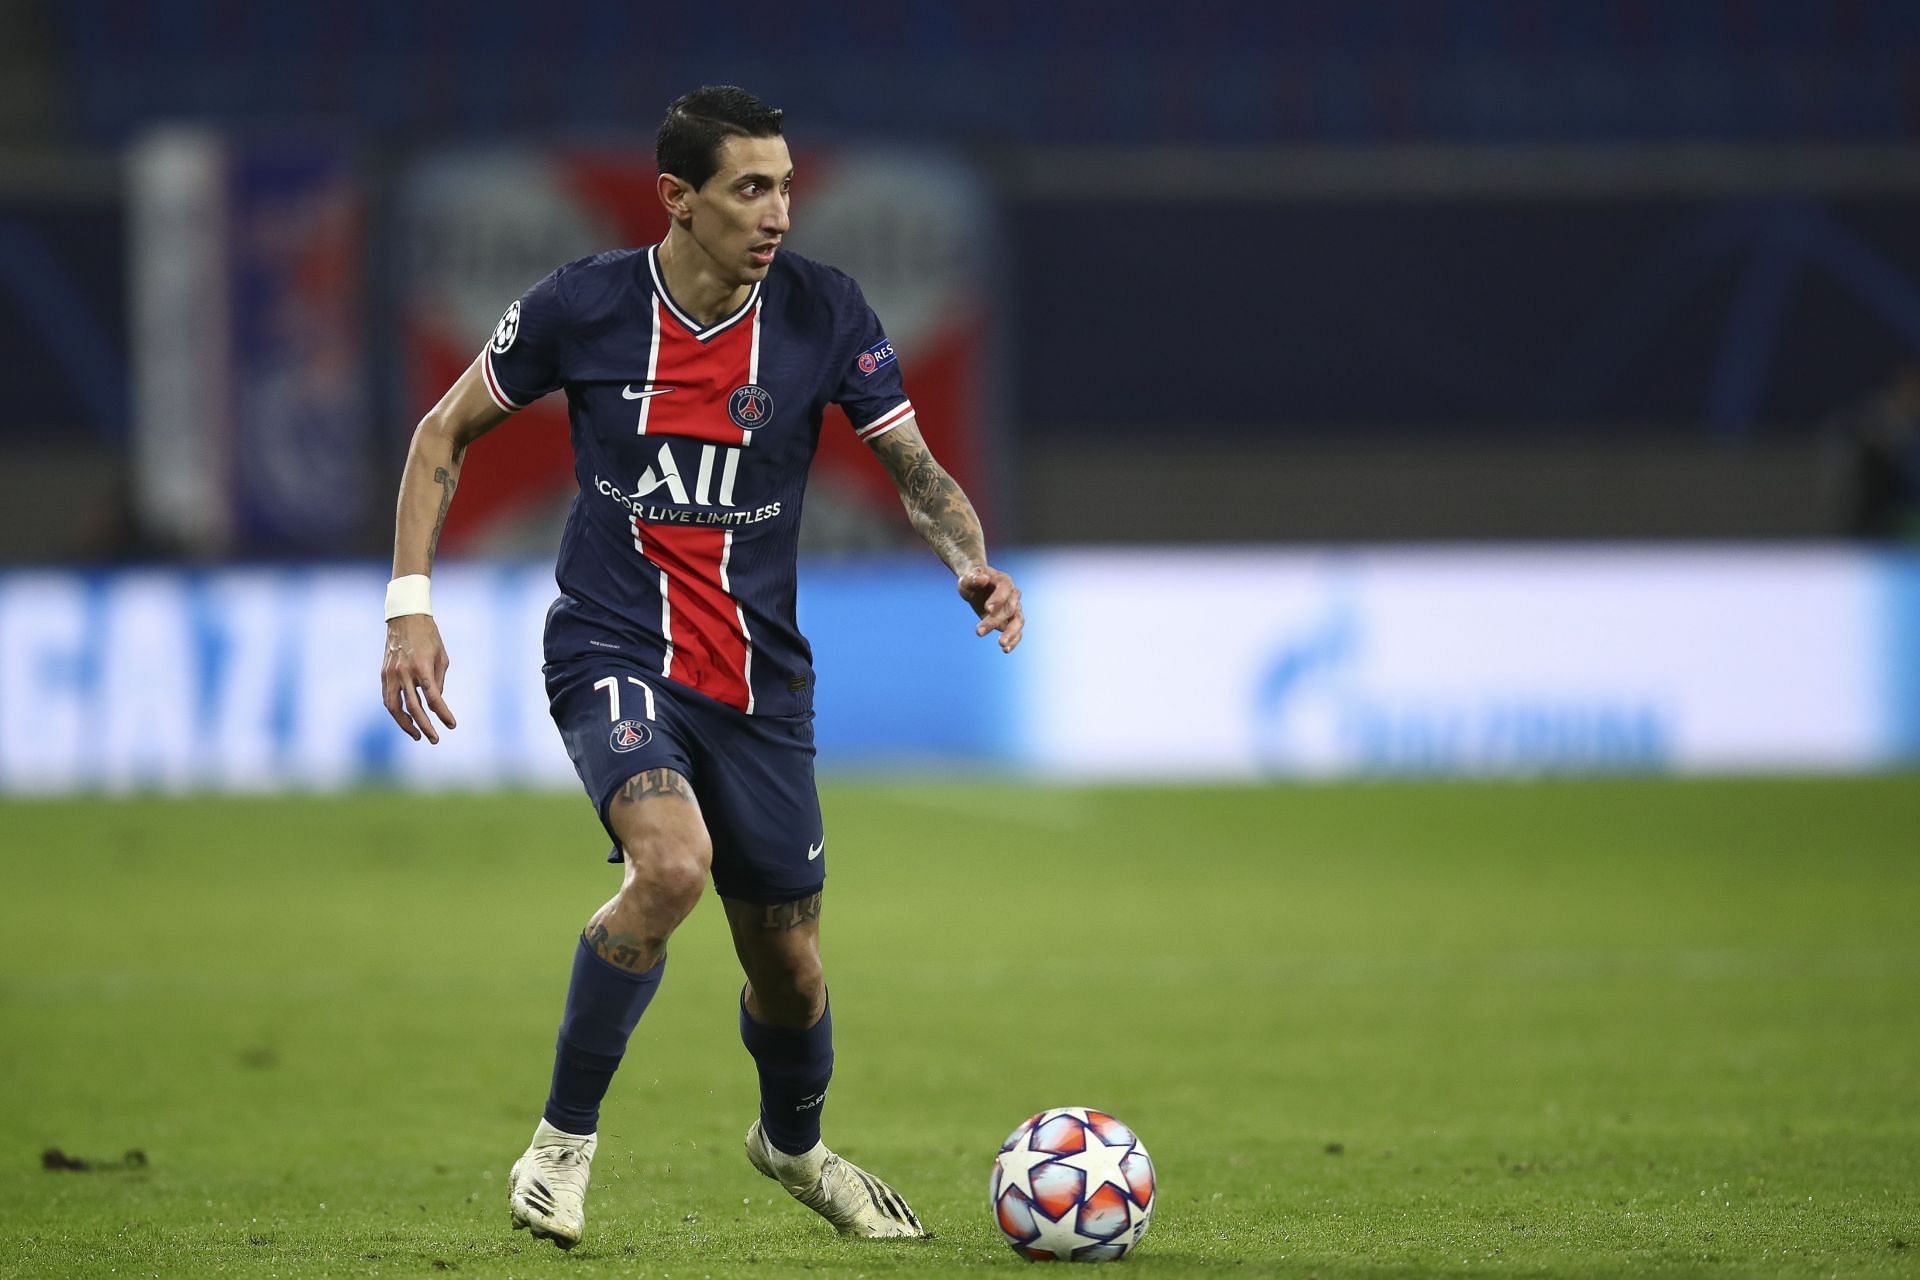 Angel Di Maria has been a consistent performer for PSG.